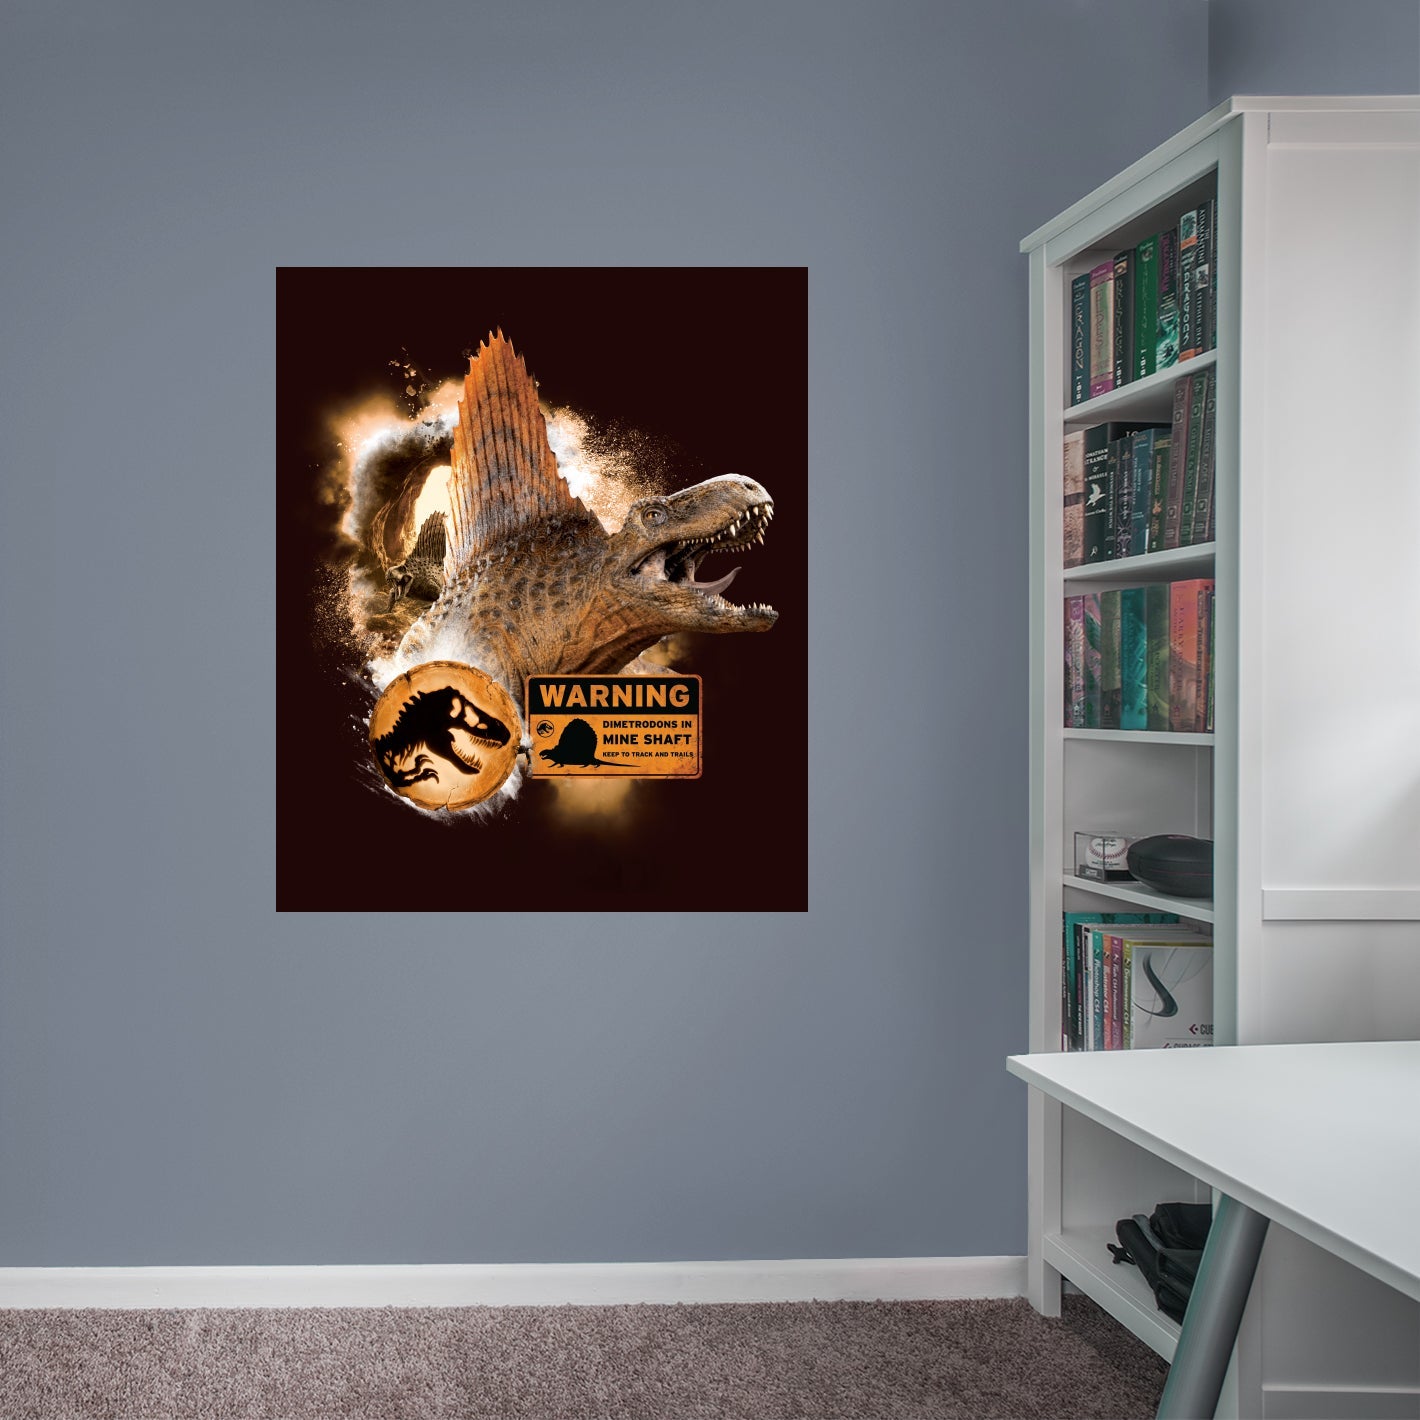 Jurassic World Dominion: Dimetrodon Collage Poster - Officially Licensed NBC Universal Removable Adhesive Decal